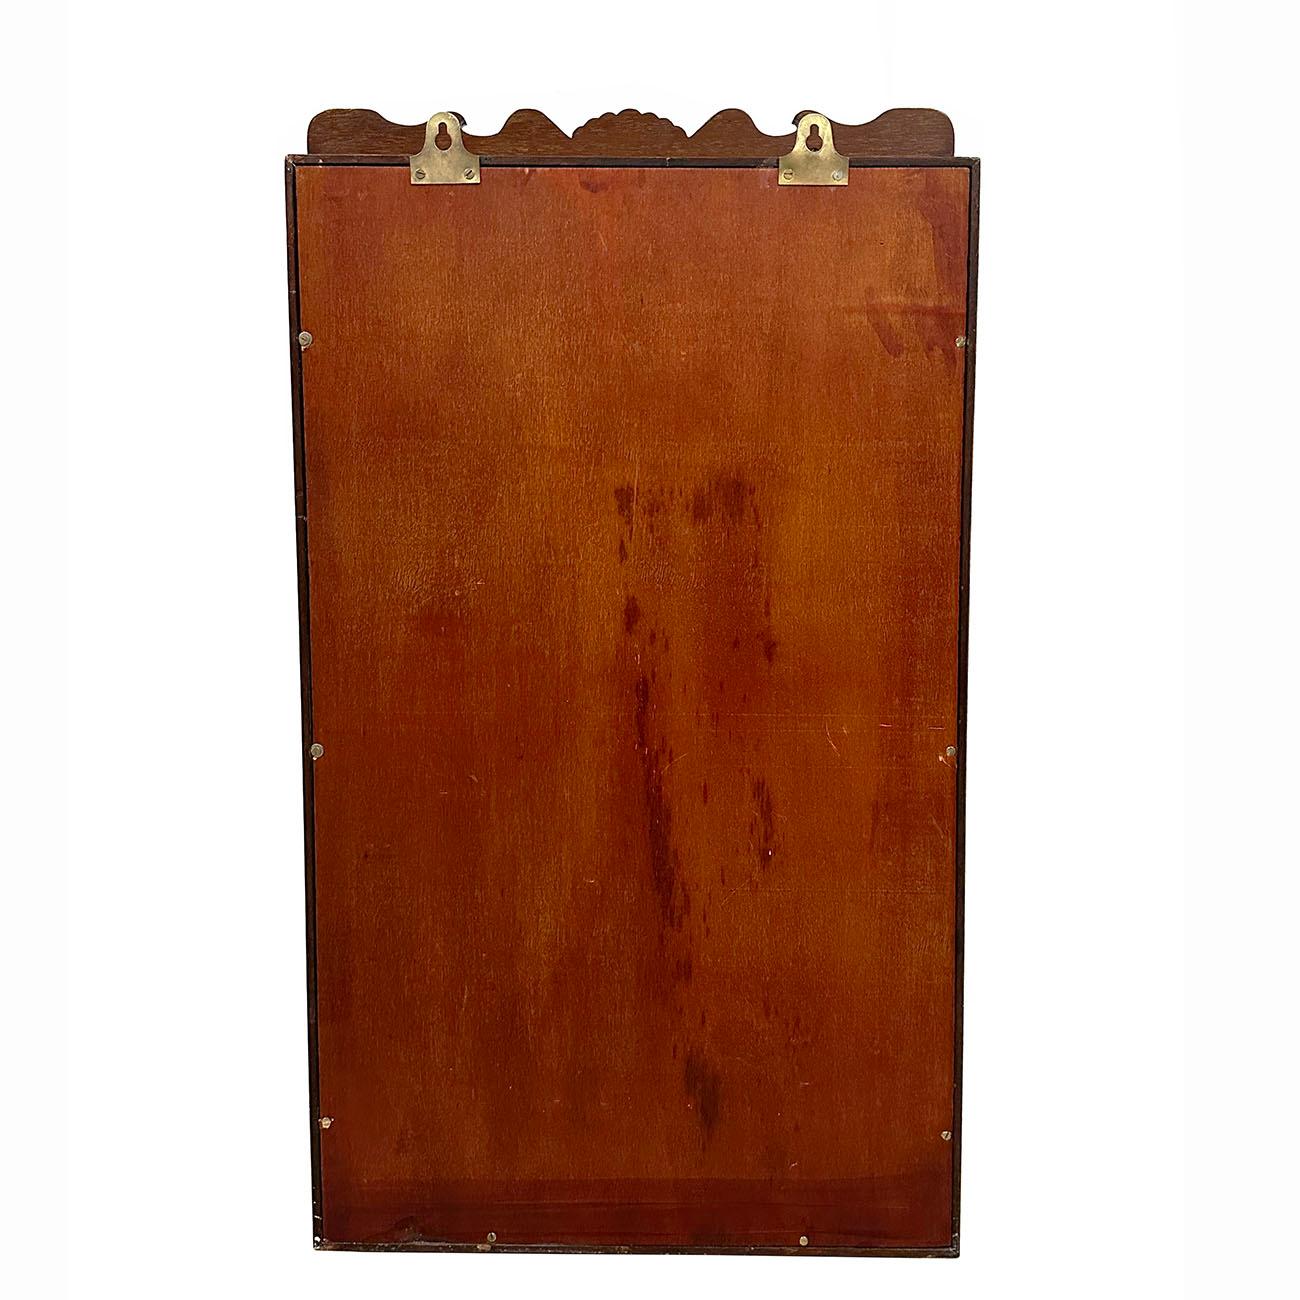 Wood Mid-20th Century Chinese Hardwood Wall Mounted Display/Curio Cabinet